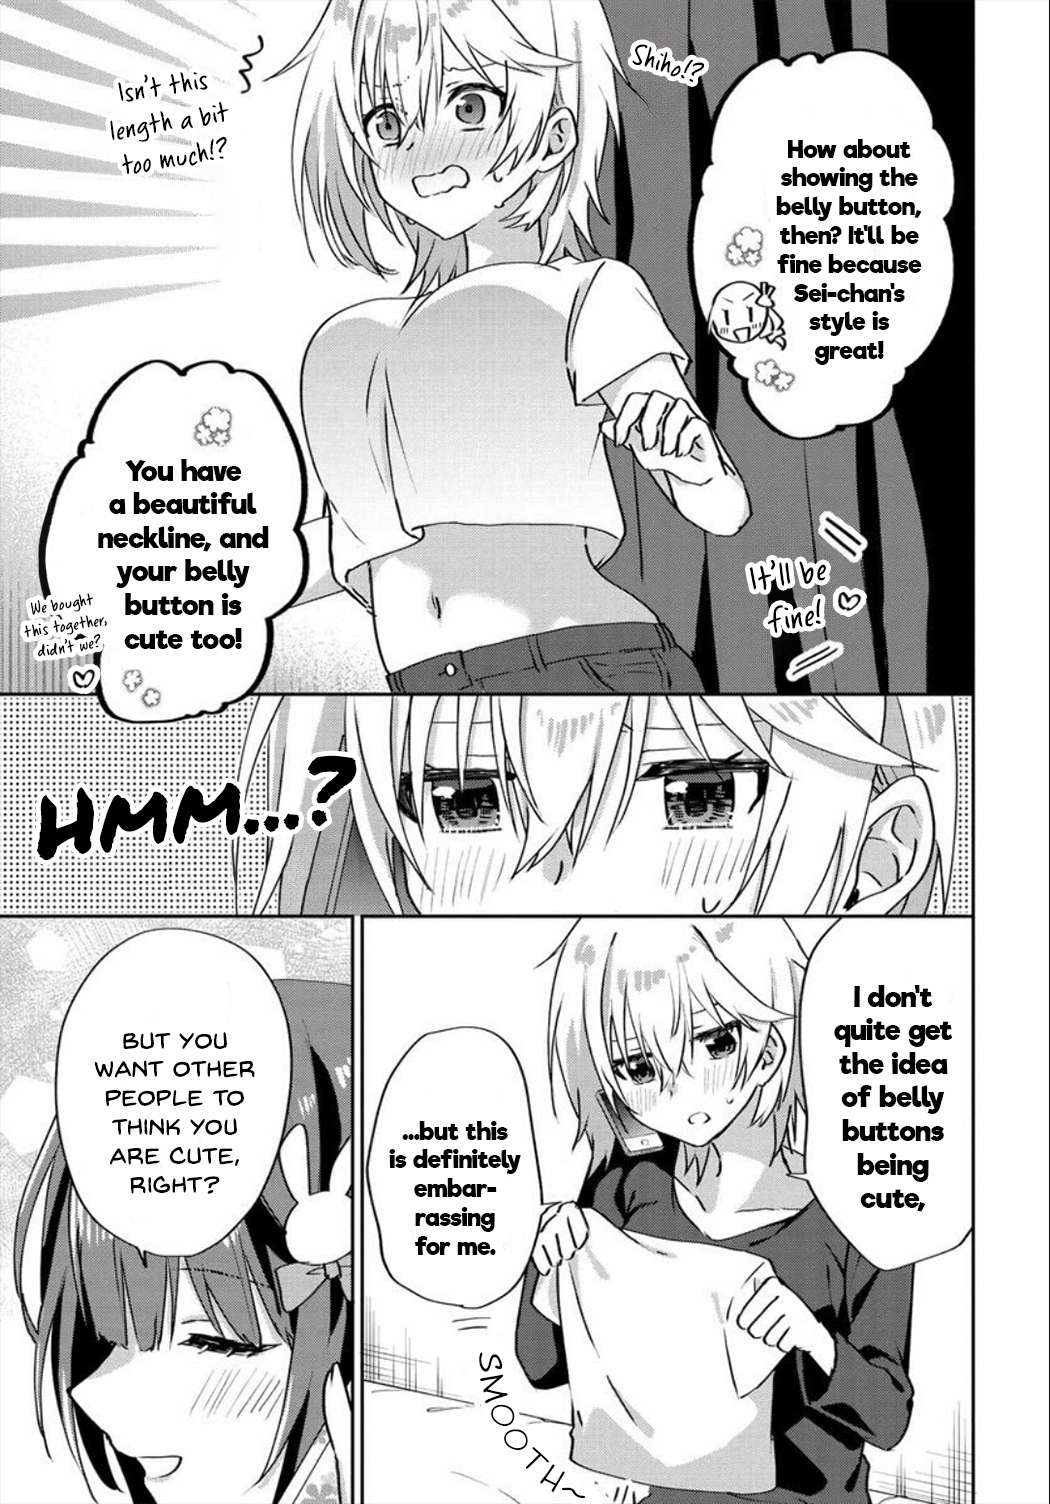 Since I’ve Entered the World of Romantic Comedy Manga, I’ll Do My Best to Make the Losing Heroine Happy. - chapter 6.6 - #3